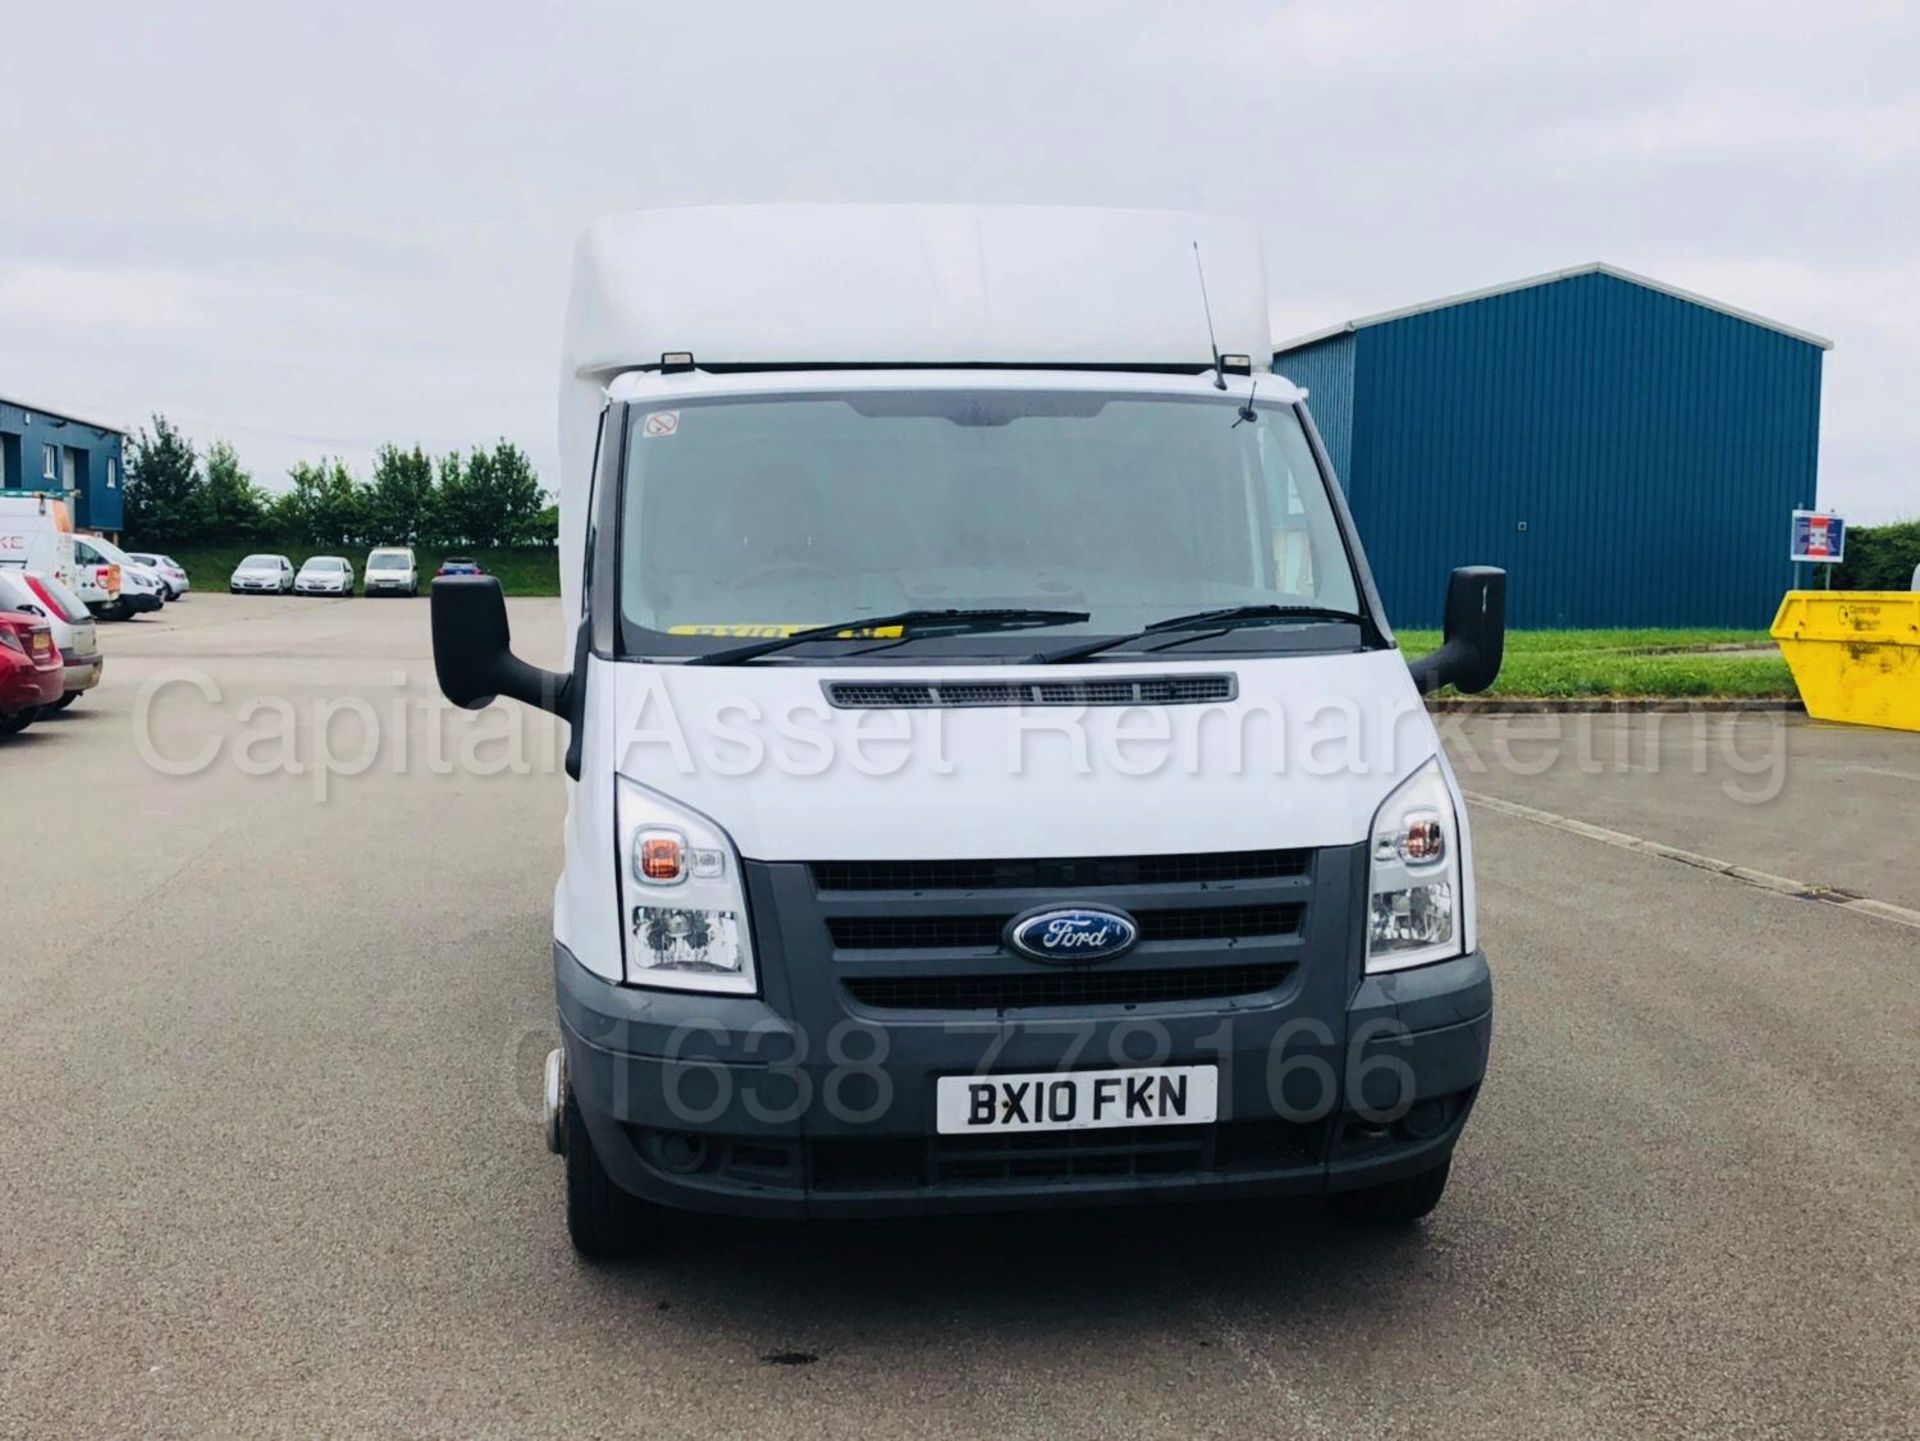 (On Sale) FORD TRANSIT 100 350 'BOX / LUTON VAN' (2010) '2.4 TDCI - 100 BHP' (1 COMPANY OWNER) - Image 18 of 29